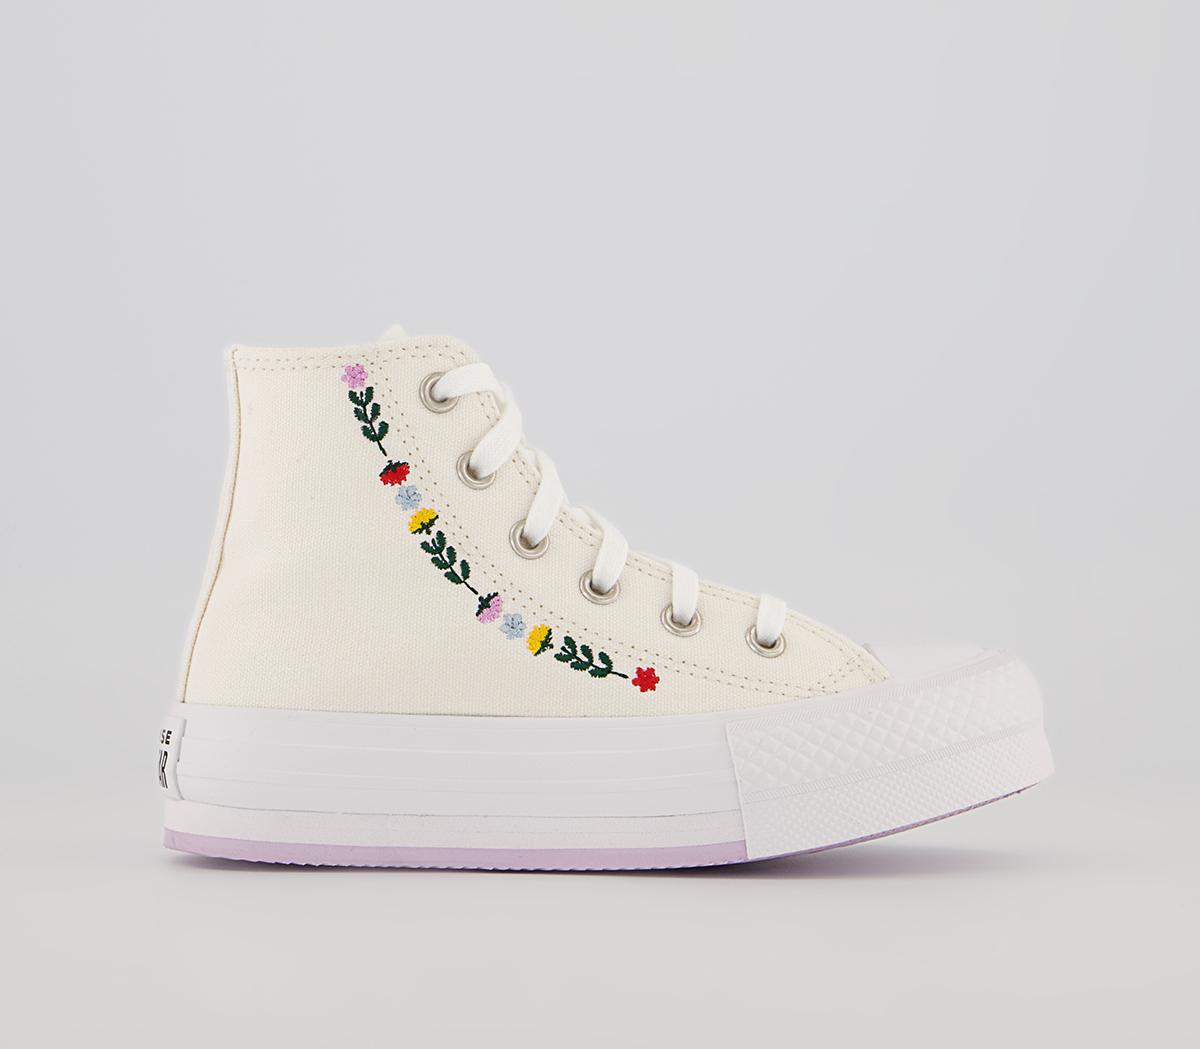 ConverseAll Star Eva Lift Hi Youth TrainersVintage White Floral Festival